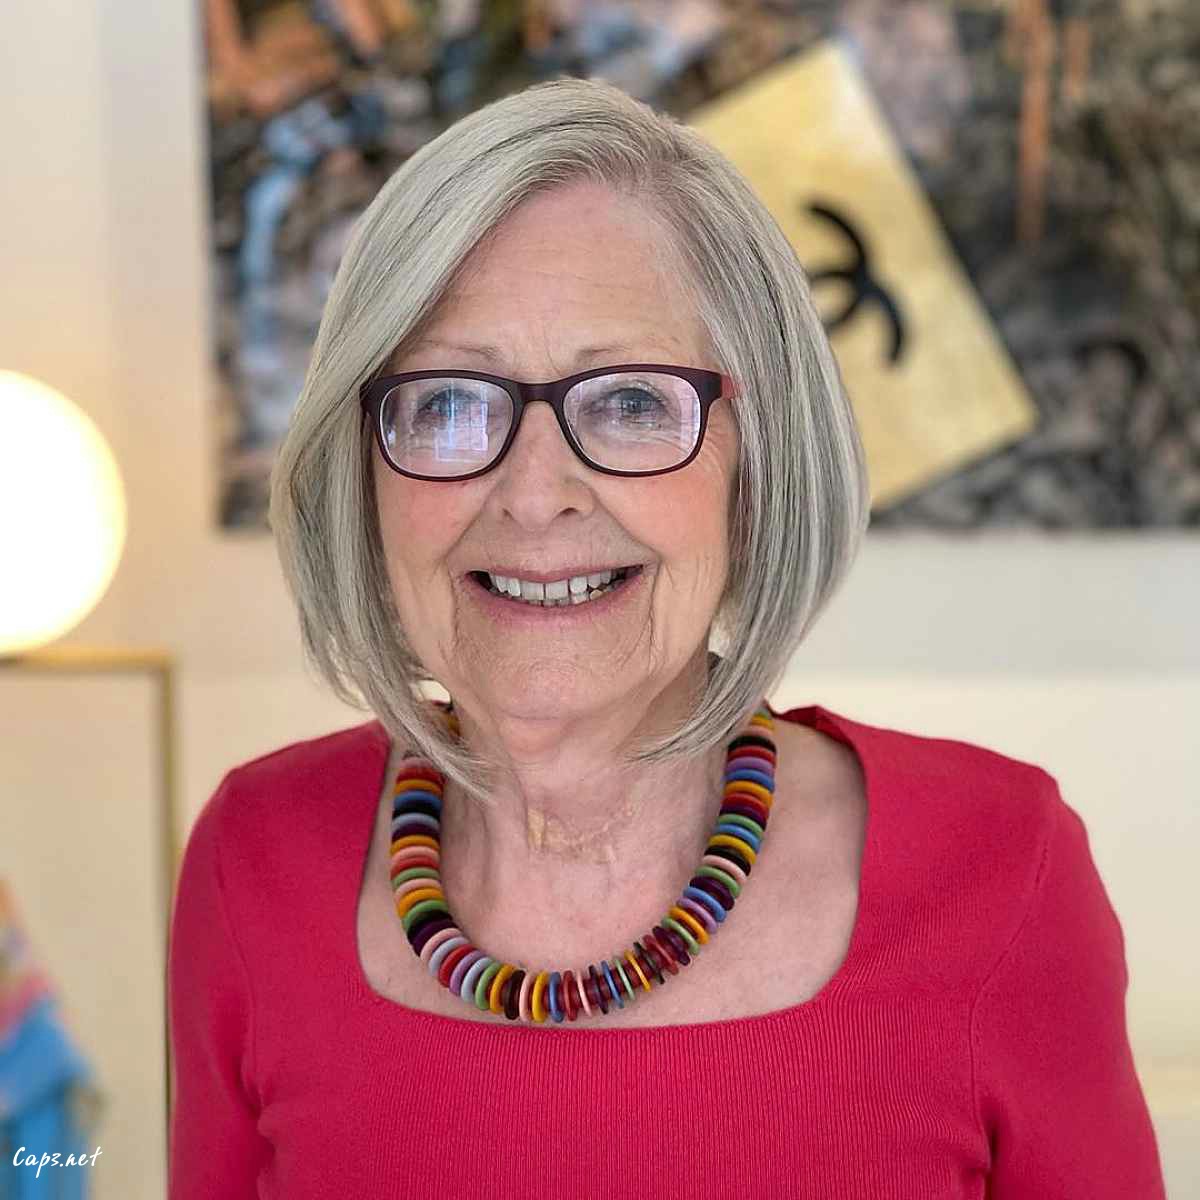 short bob hairstyle for seniors over 60 with glasses